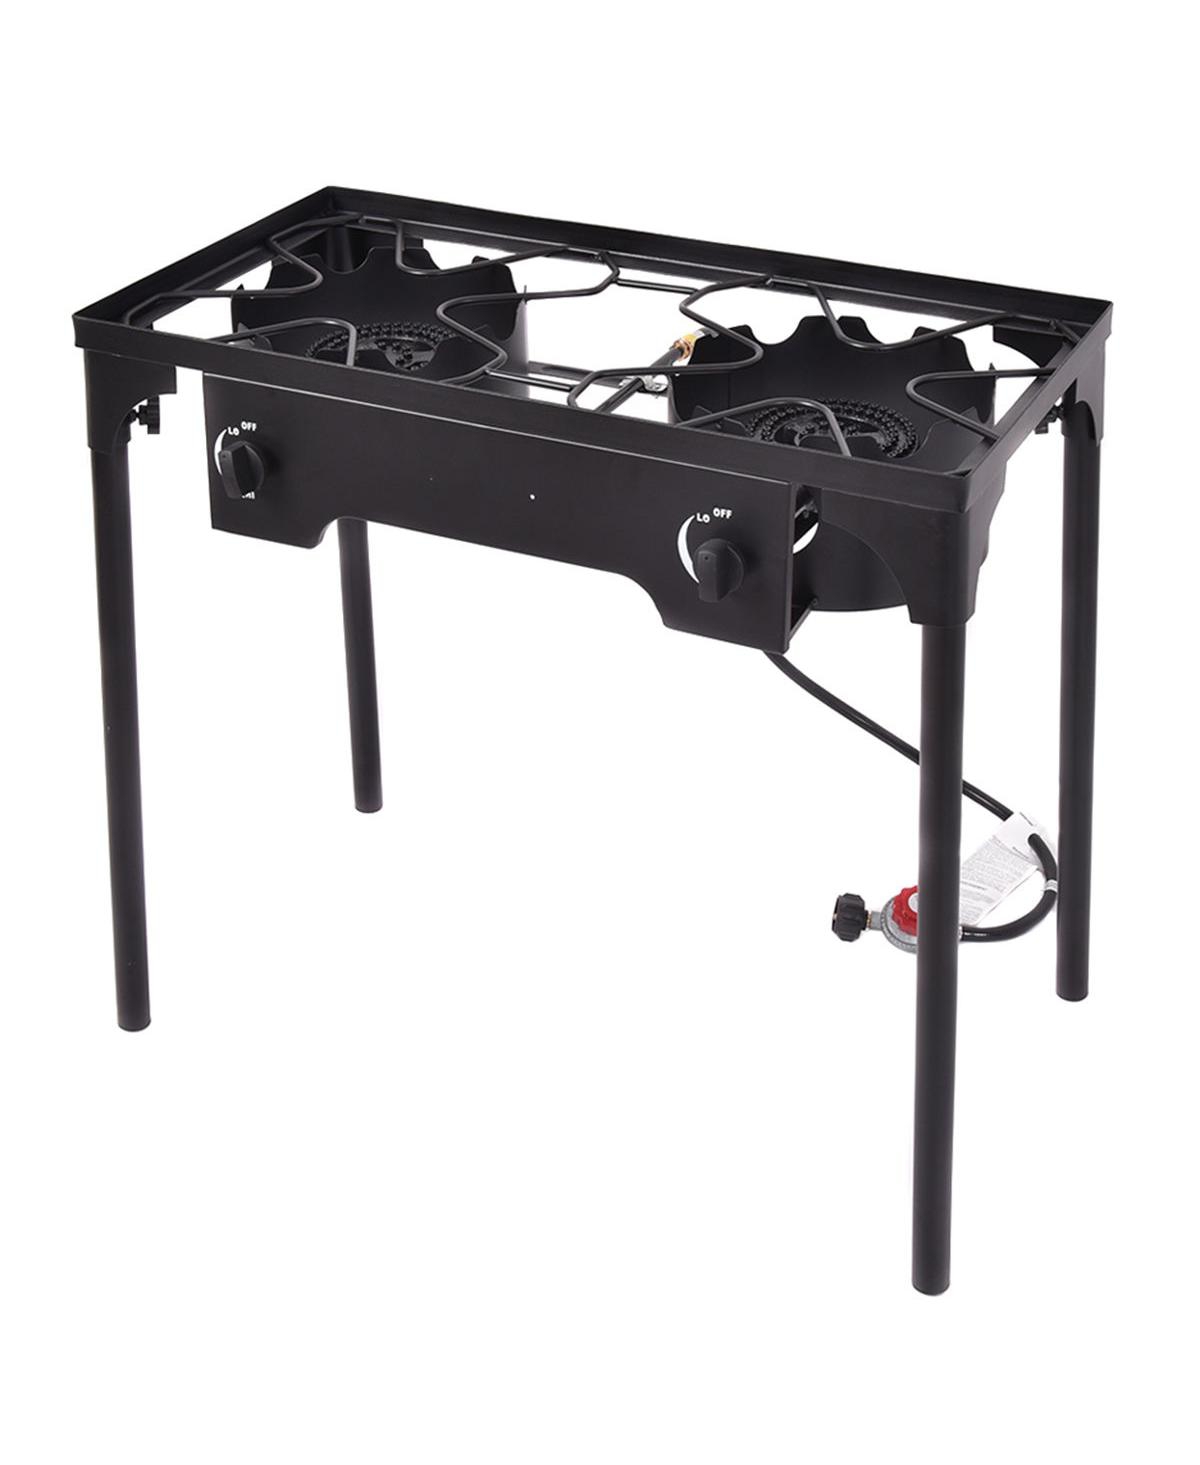 Double Burner Gas Propane Cooker Outdoor Camping Picnic Bbq Grill - Black